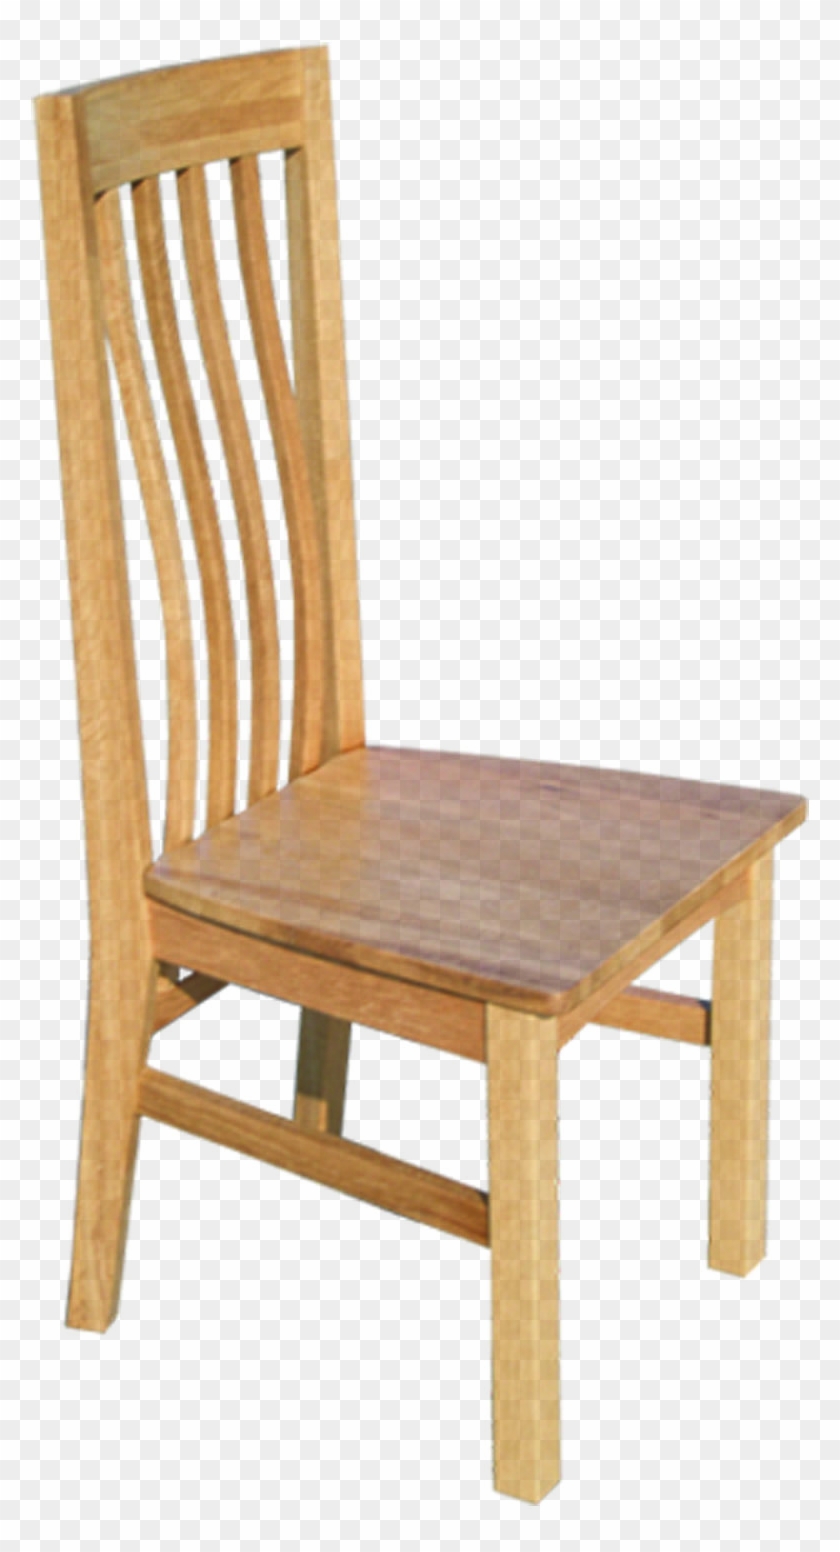 Product Code Oak34-2 - Chair Clipart #6006579